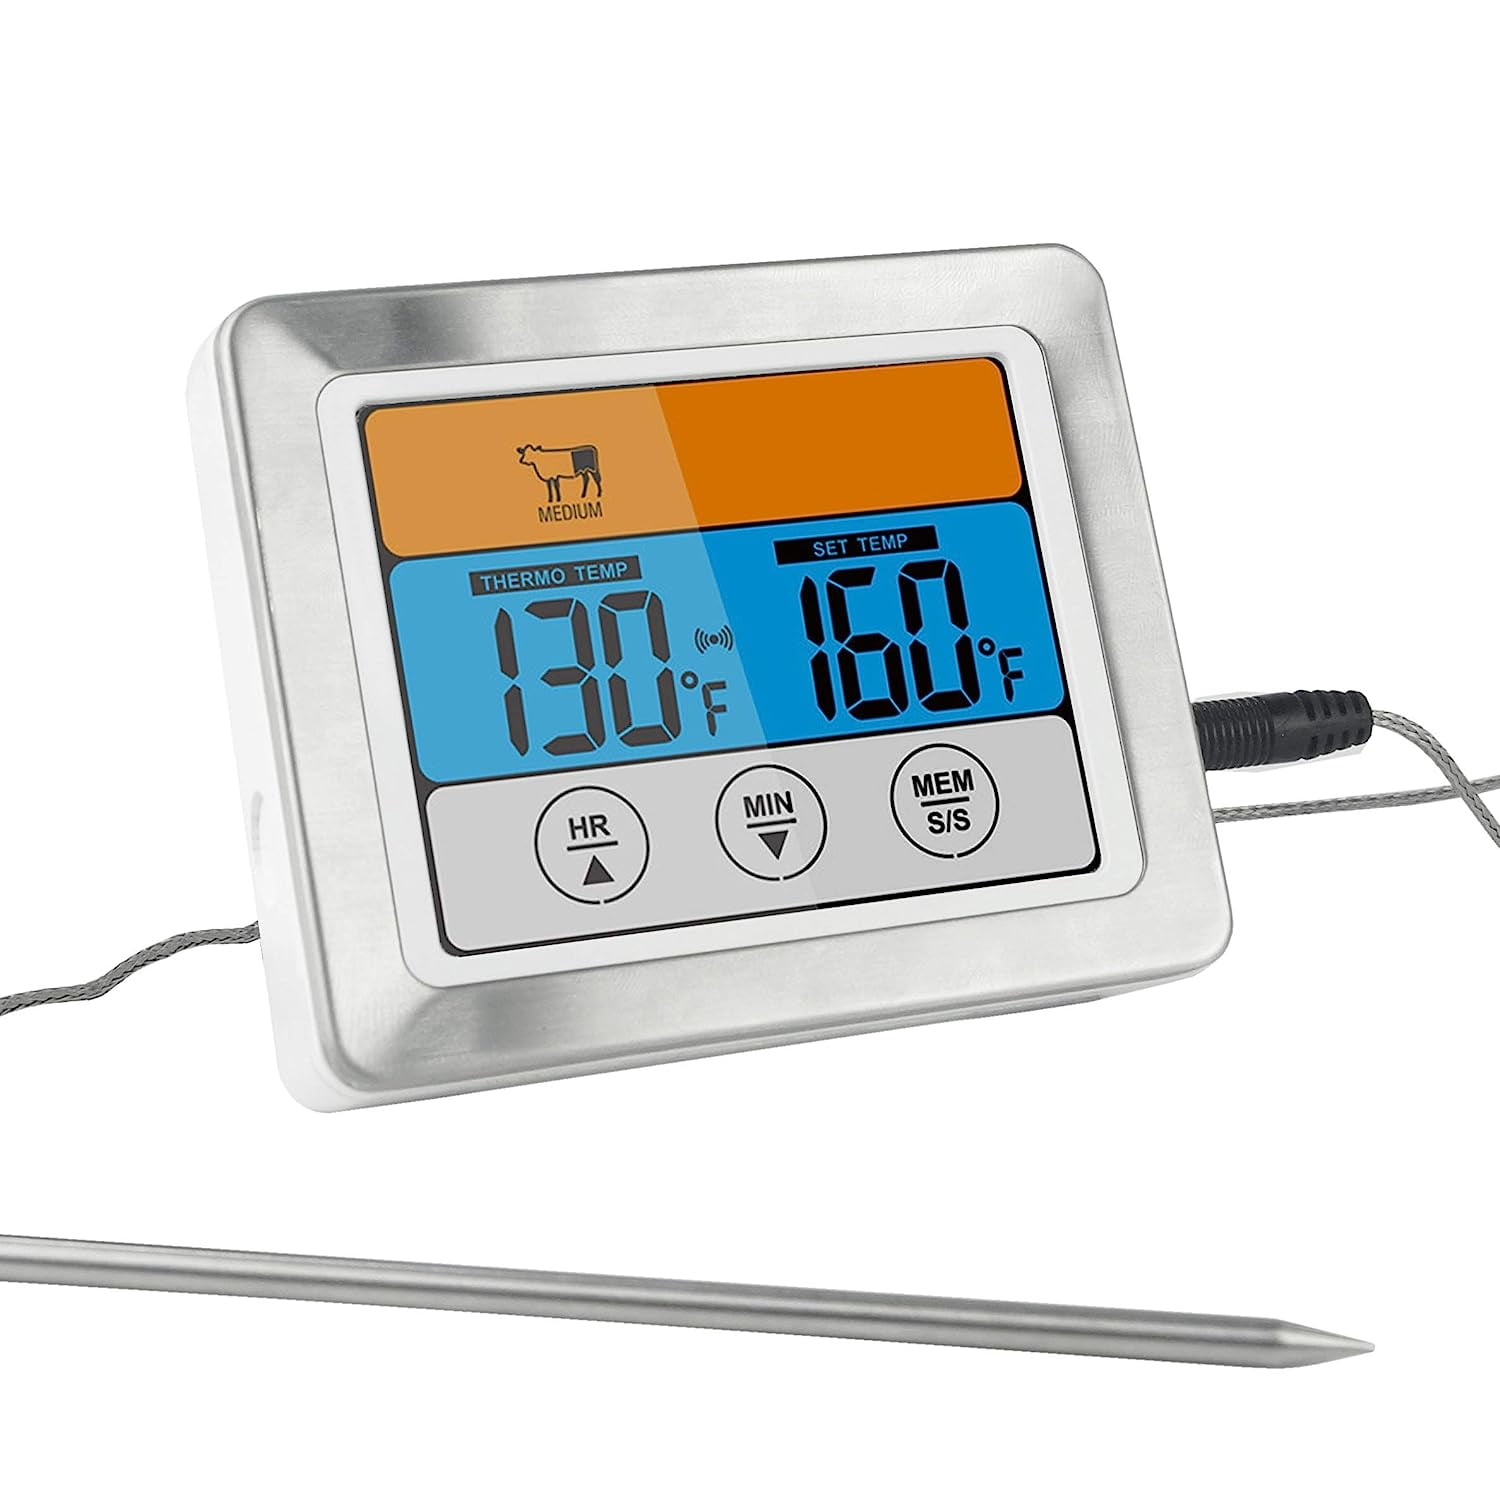 AcuRite Digital Meat Thermometer for Oven/Grill/Barbecue/Fryer